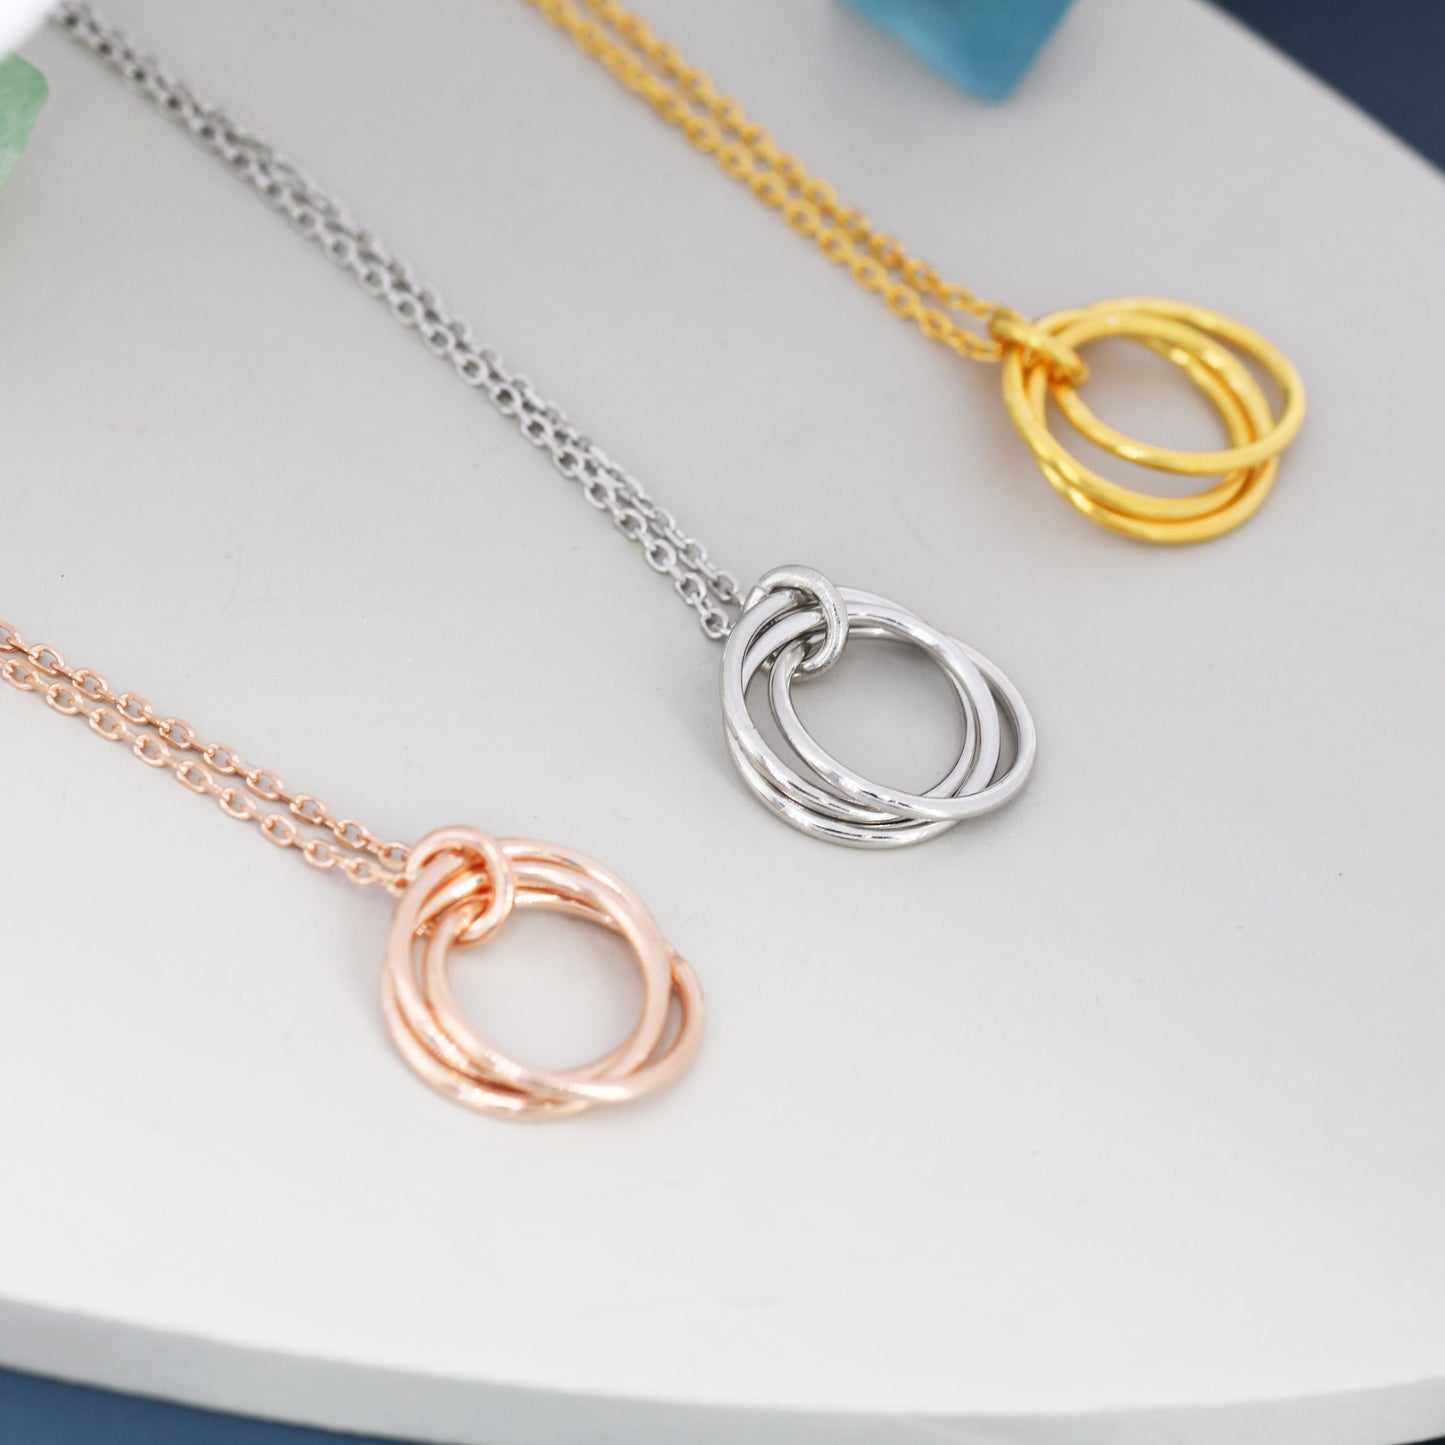 Sterling Silver Three Interlocking Circles Pendant Necklace, Three Entwined Circles for 30s, Infinity Necklace, Silver, Gold and Rose Gold,